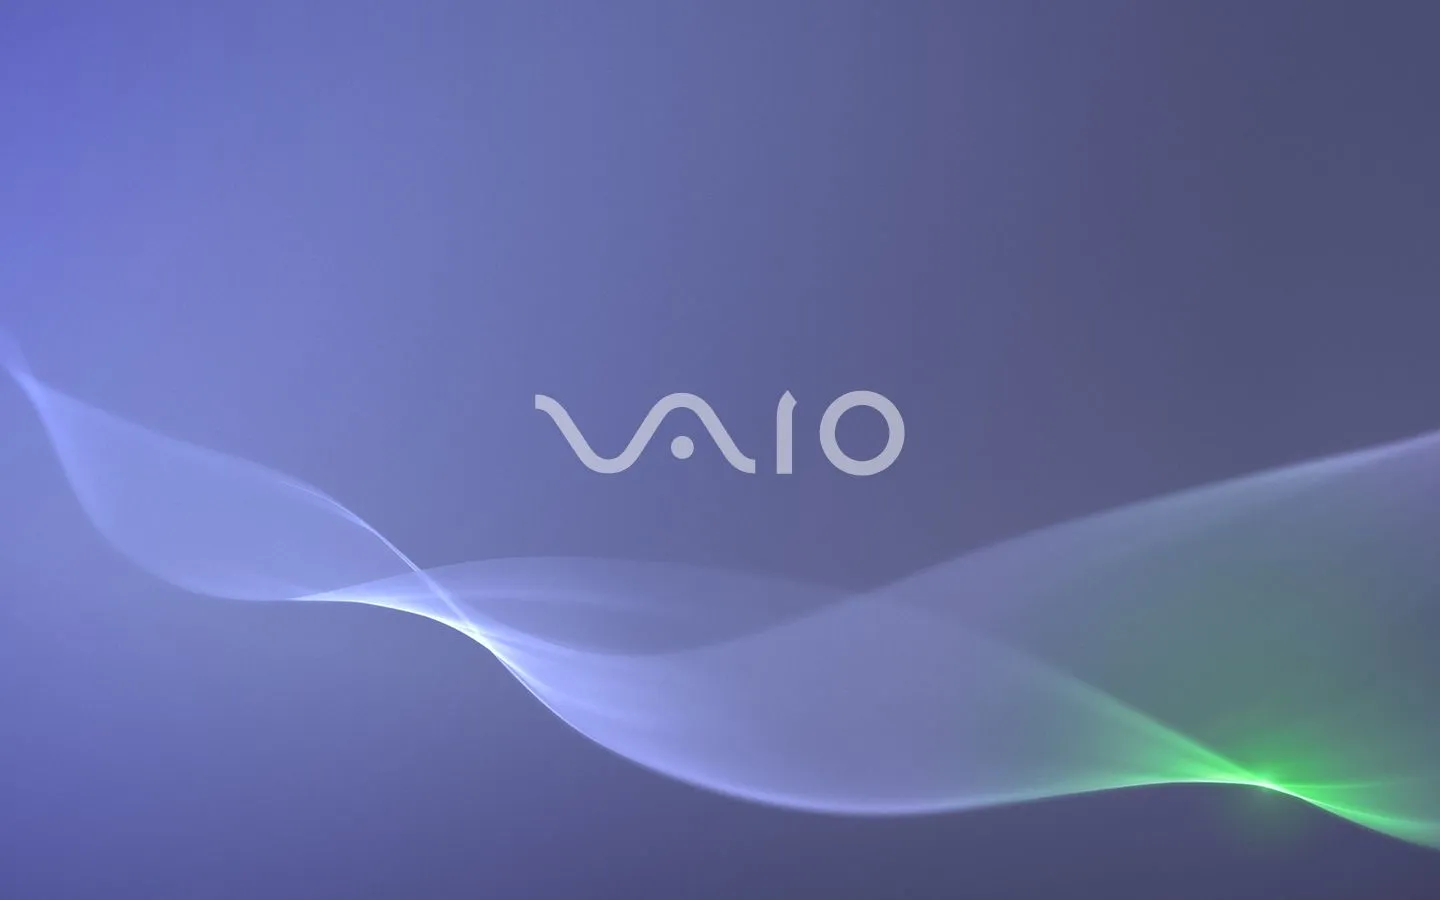 Free Desktop Backgrounds And Wallpapers: Sony Vaio Laptop ...